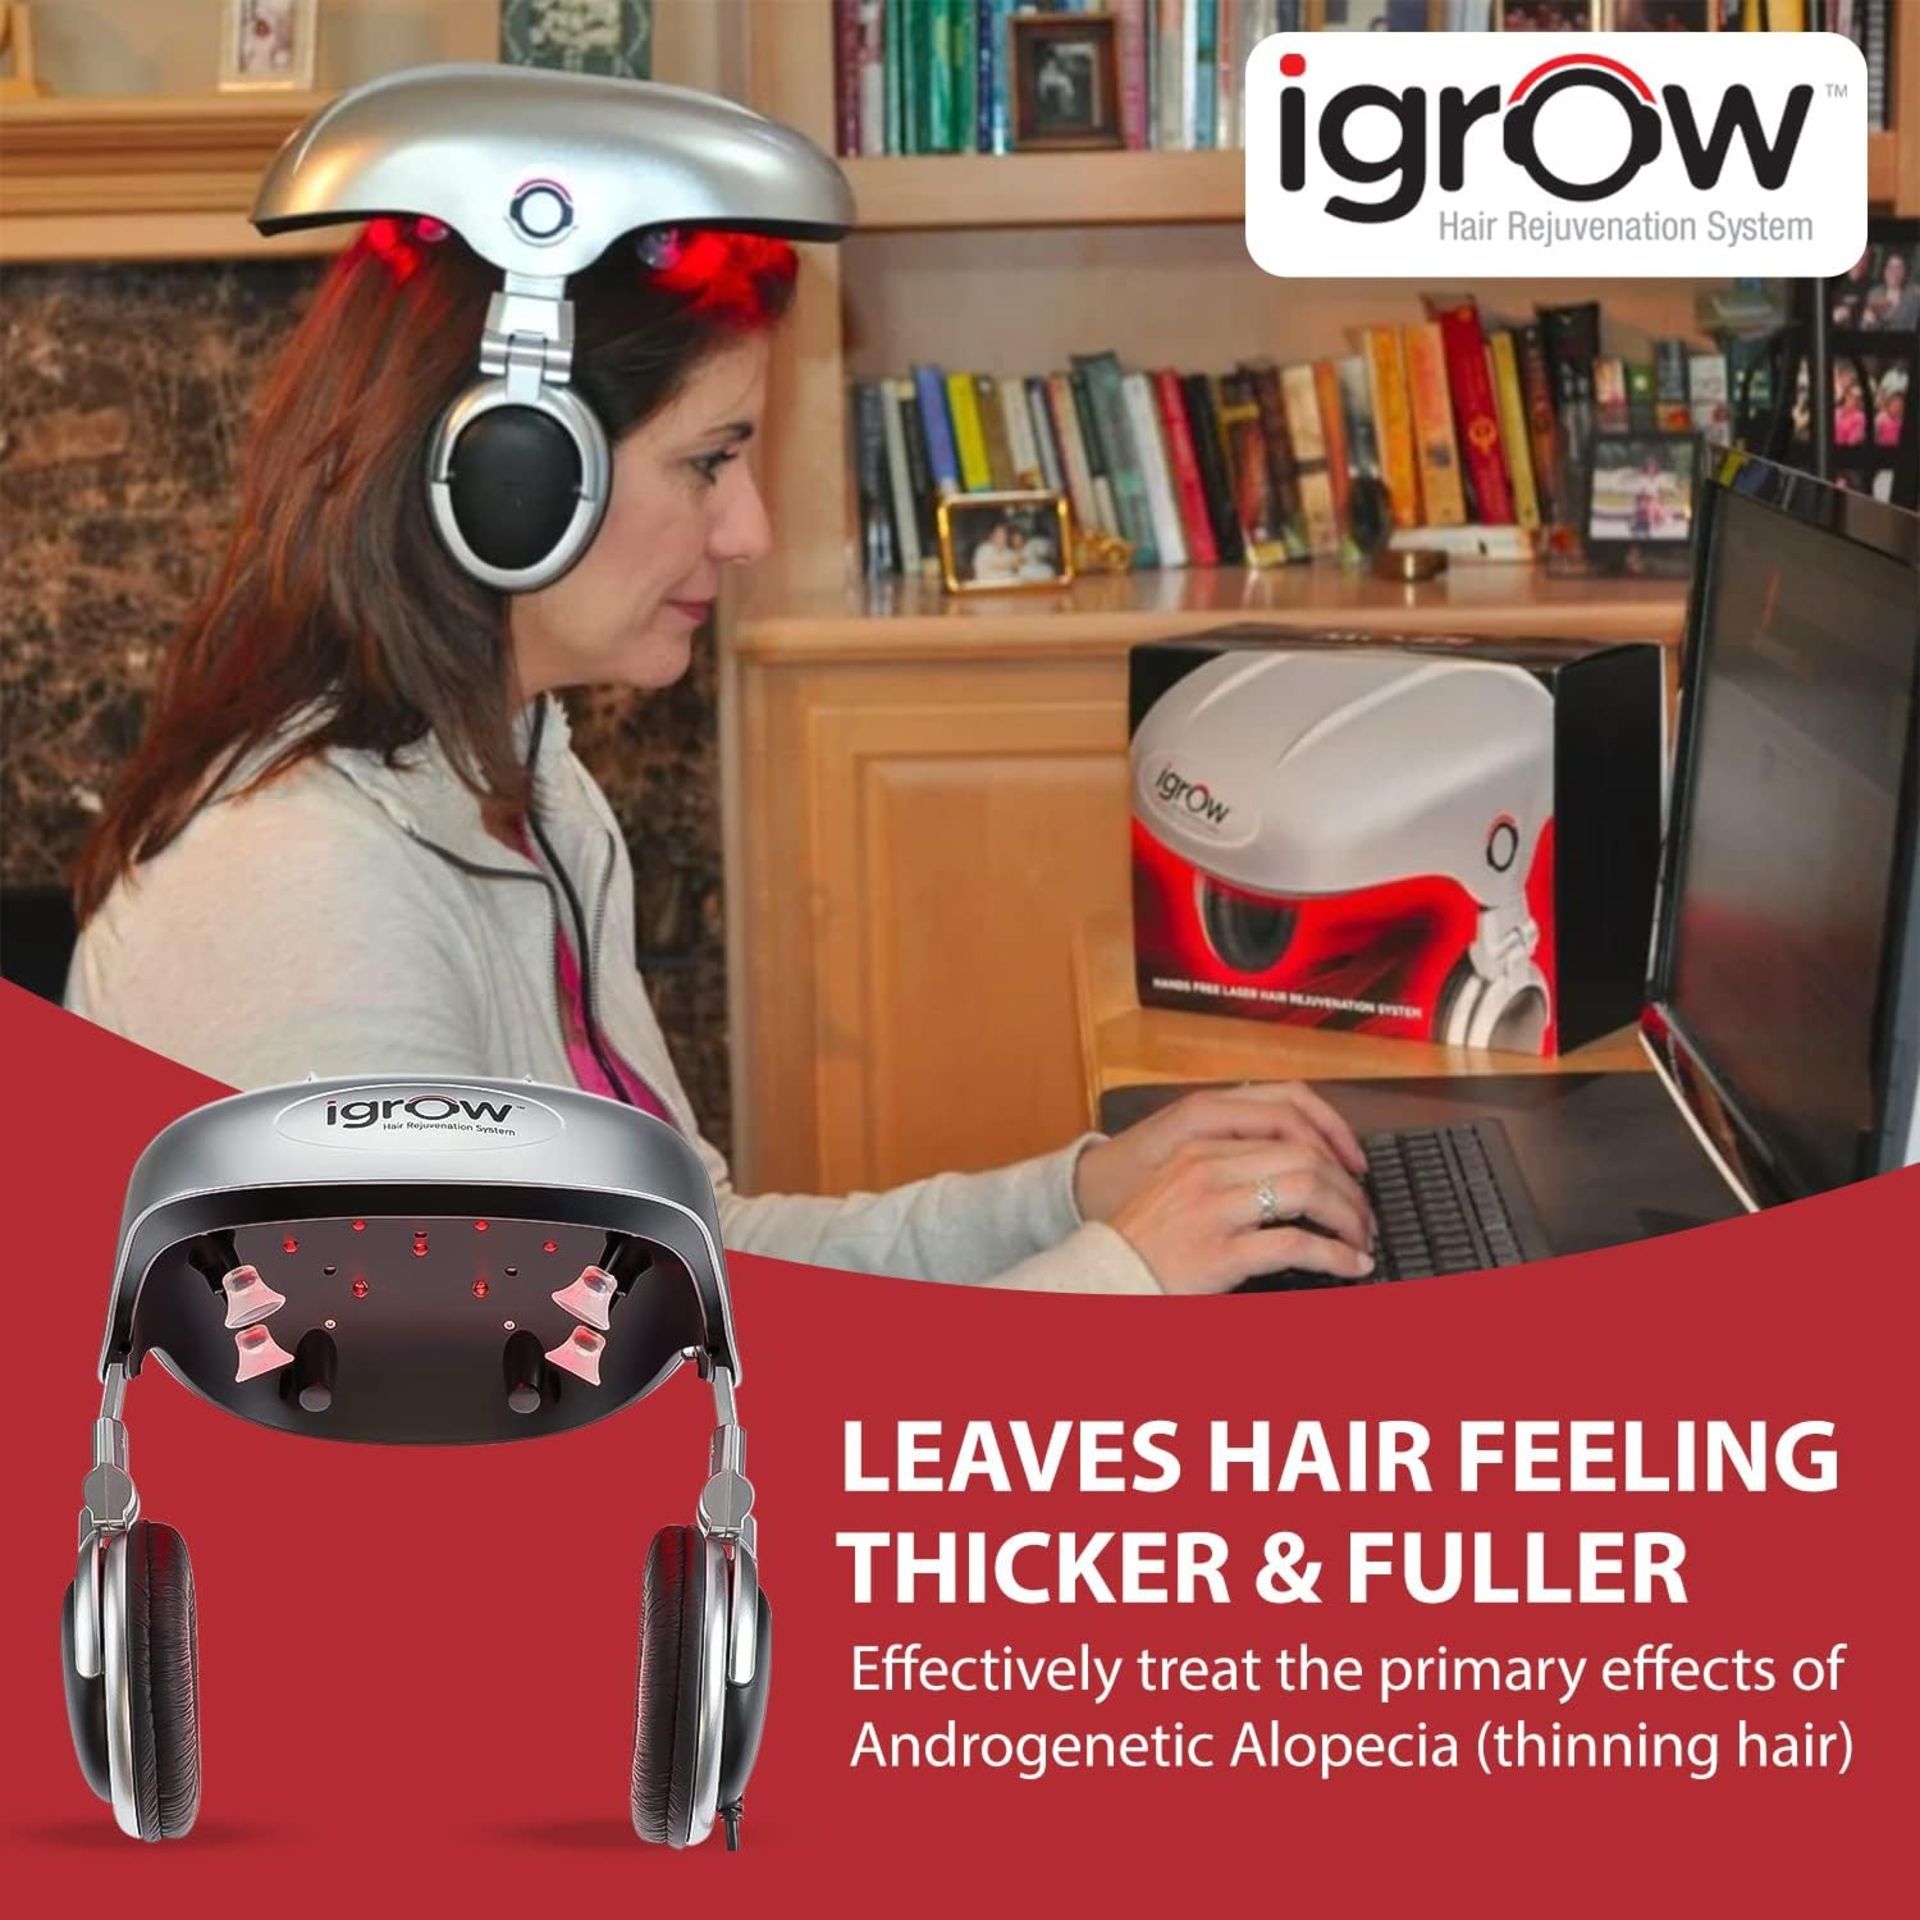 Brand New iGrow Professional Laser Hair Growth System R13-14 - FDA Cleared Laser Cap Hair Growth for - Image 4 of 5